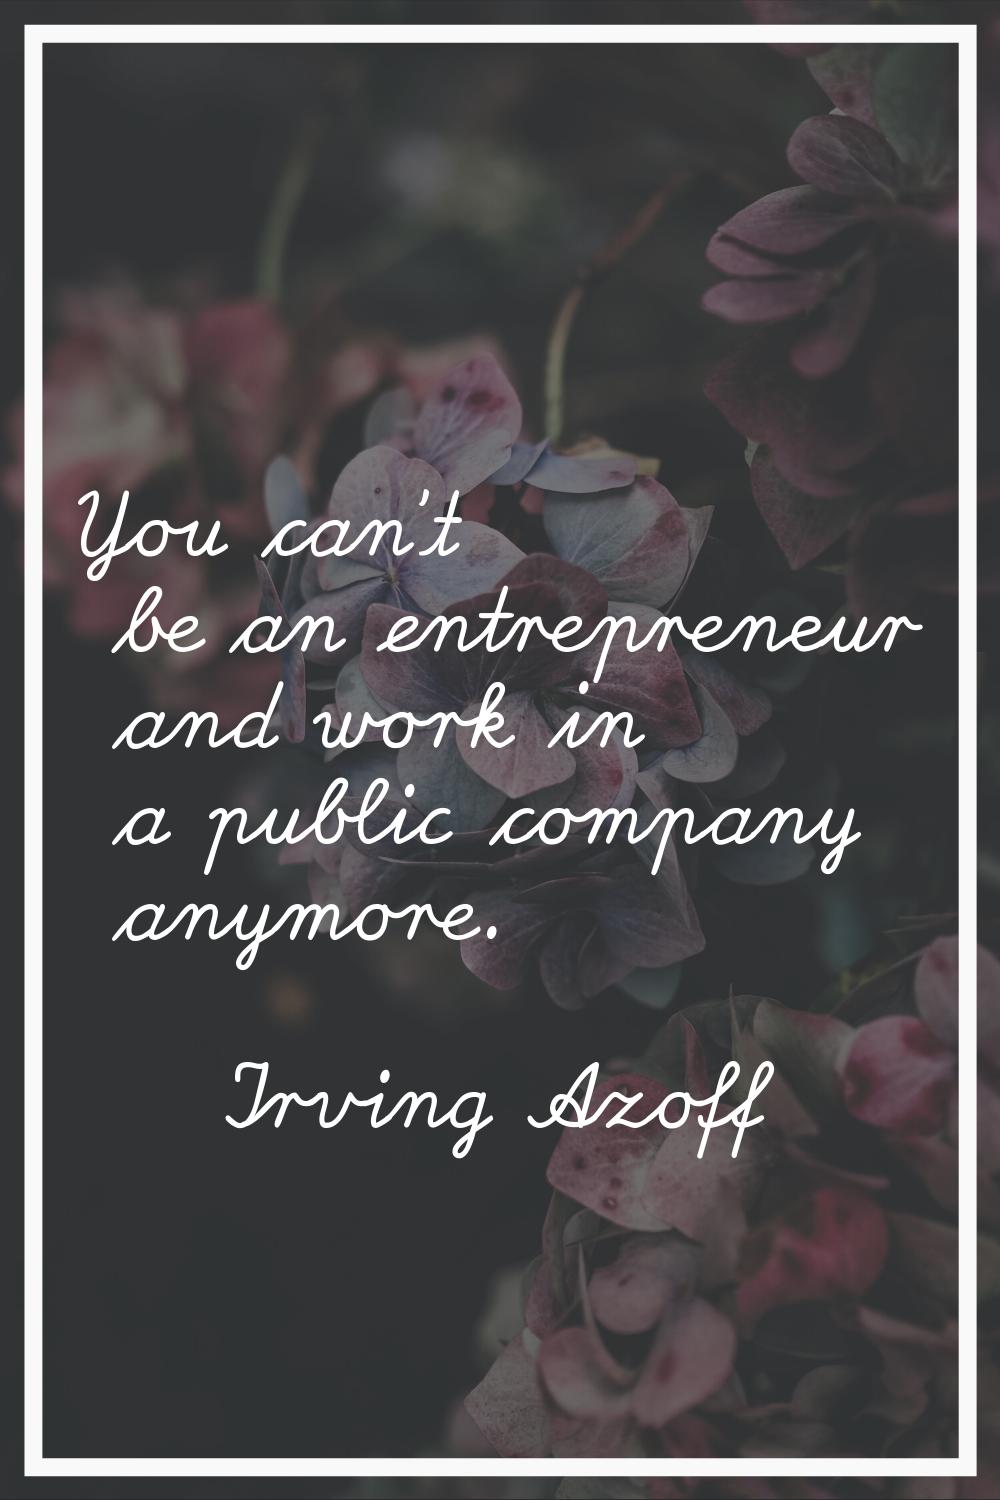 You can't be an entrepreneur and work in a public company anymore.